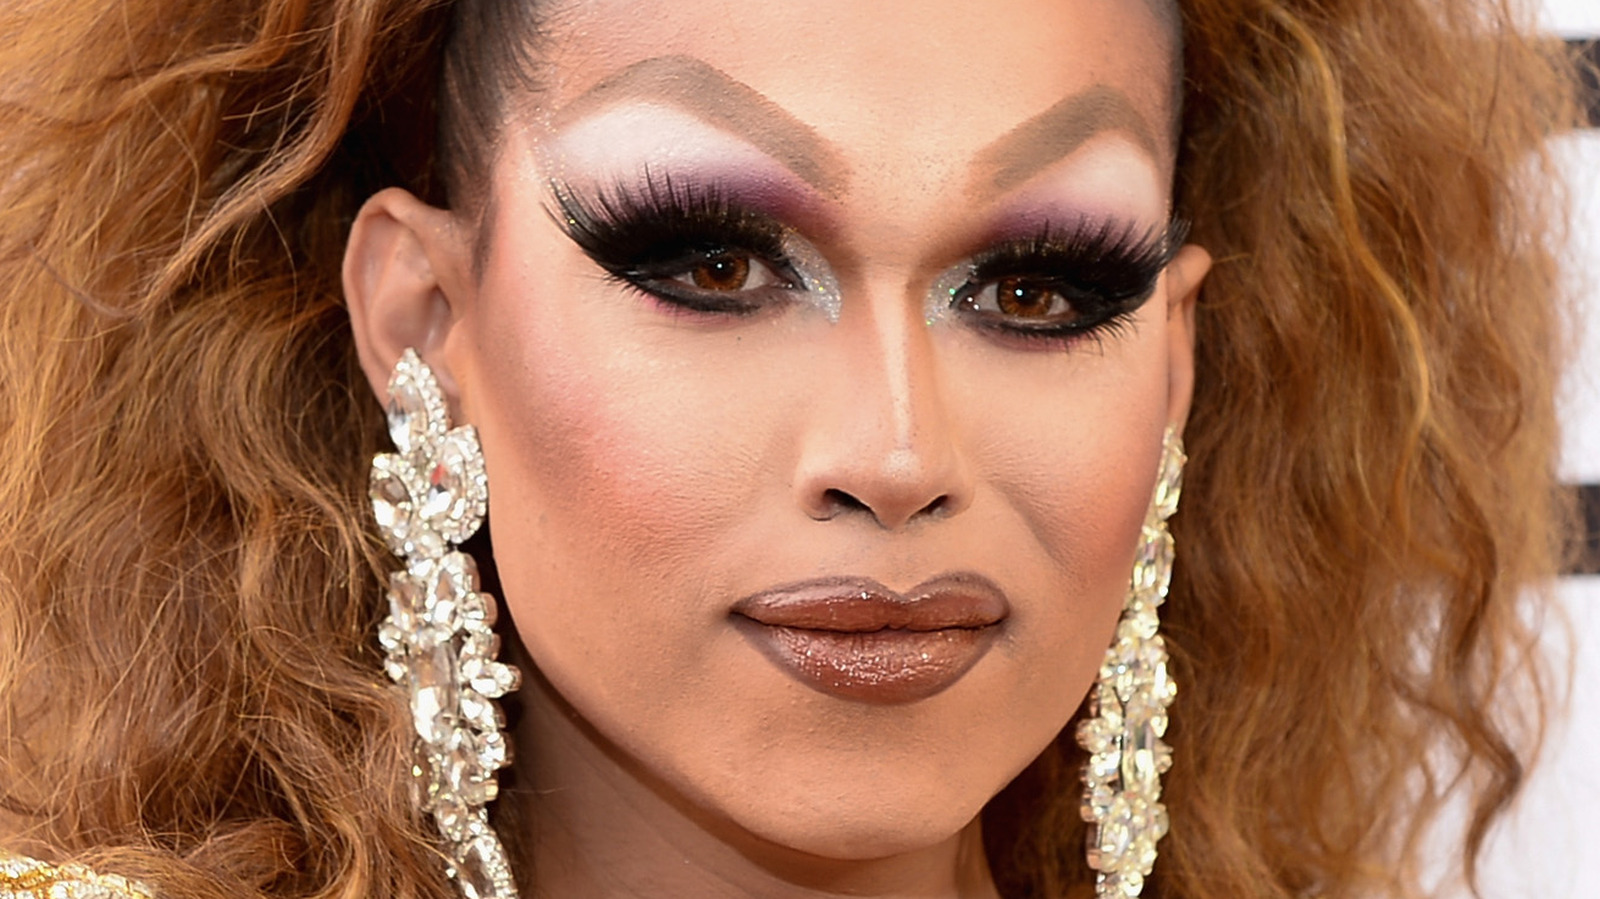 What happened to Mariah Balenciaga after RuPaul’s Drag Race was over?